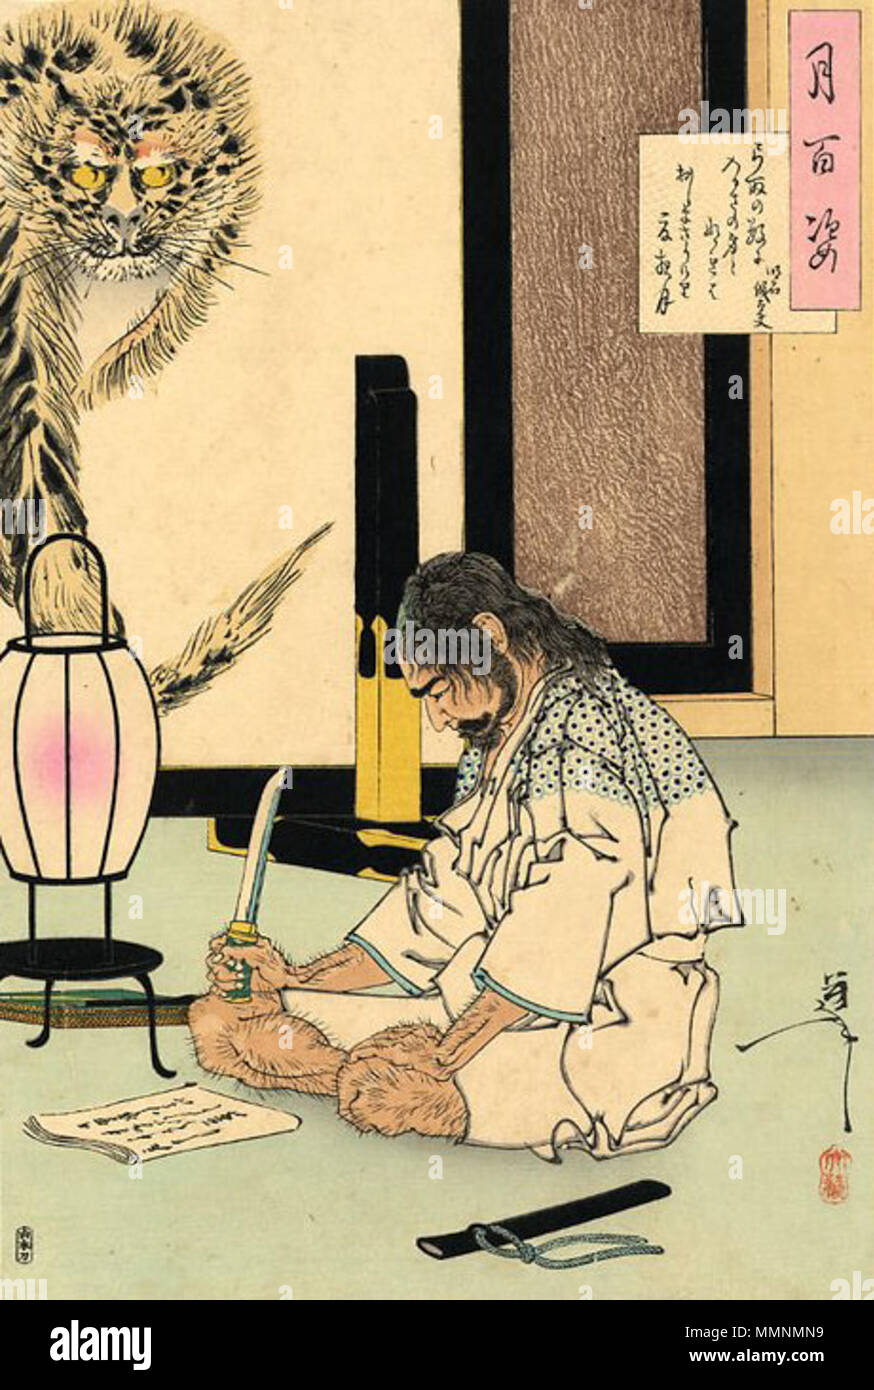 . General Akashi Gidayu preparing to commit Seppuku after losing a battle for his master in 1582. He had just written his death poem, which is also visible in the upper right corner.  Akashi Gidayu, No 83 100 Aspects of the Moon Series. created about 1890.. Akashi Gidayu writing his death poem before committing Seppuku Stock Photo